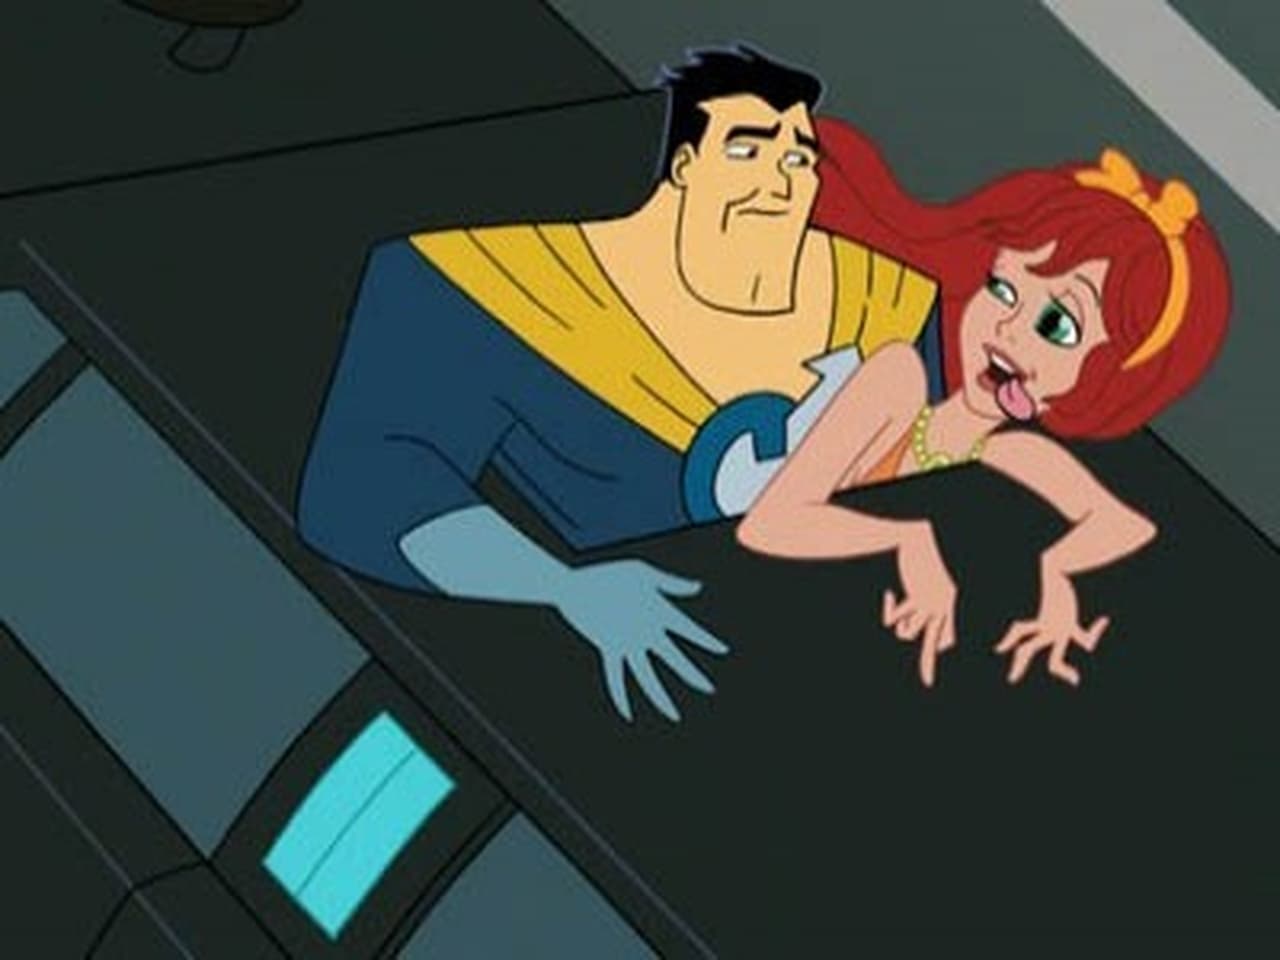 Drawn Together - Season 1 Episode 5 : The Other Cousin